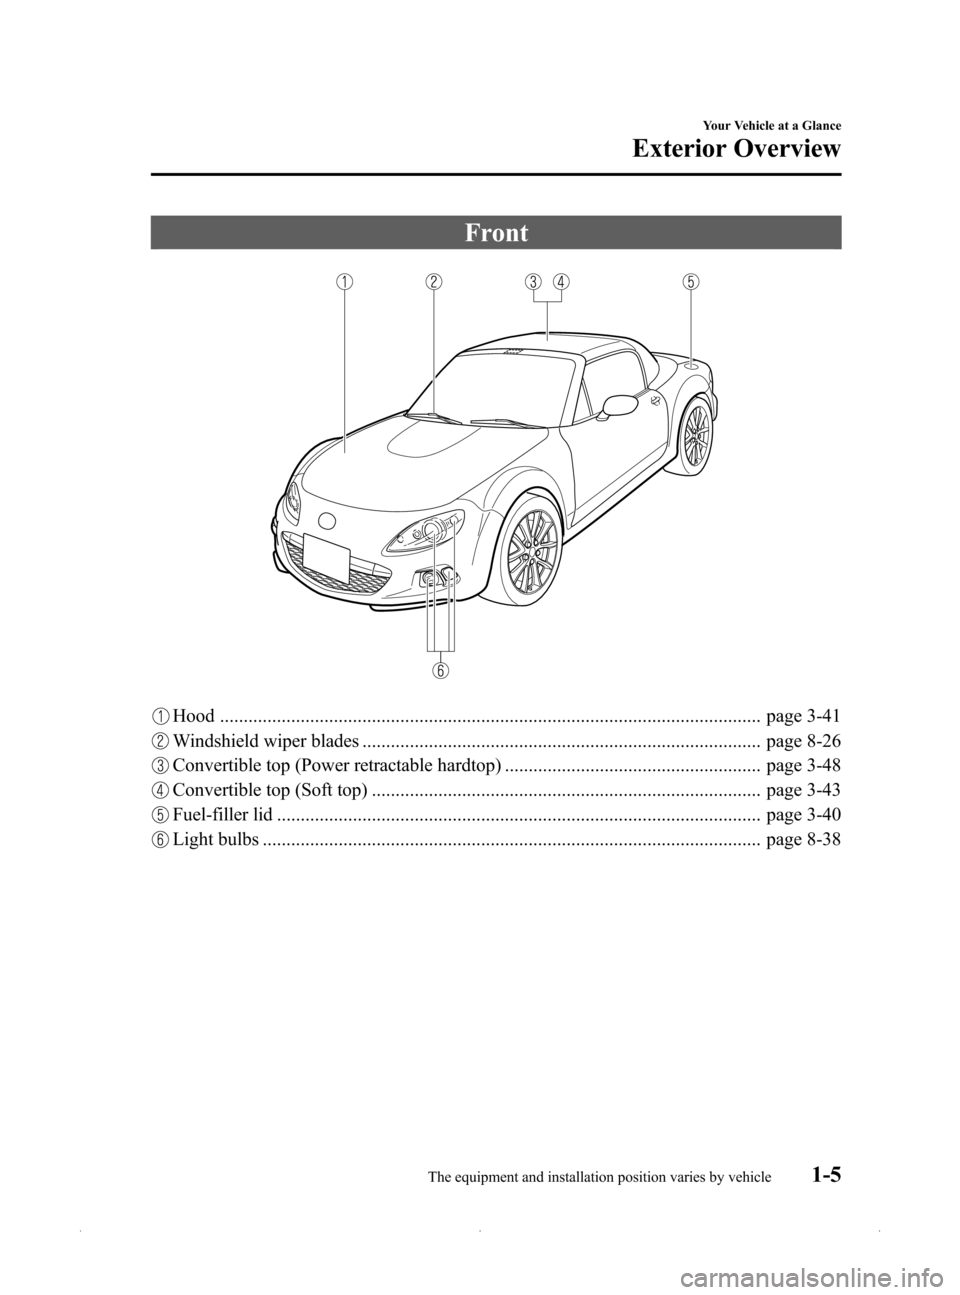 MAZDA MODEL MX-5 2015  Owners Manual (in English) Black plate (11,1)
Front
Hood .................................................................................................................. page 3-41
Windshield wiper blades .....................